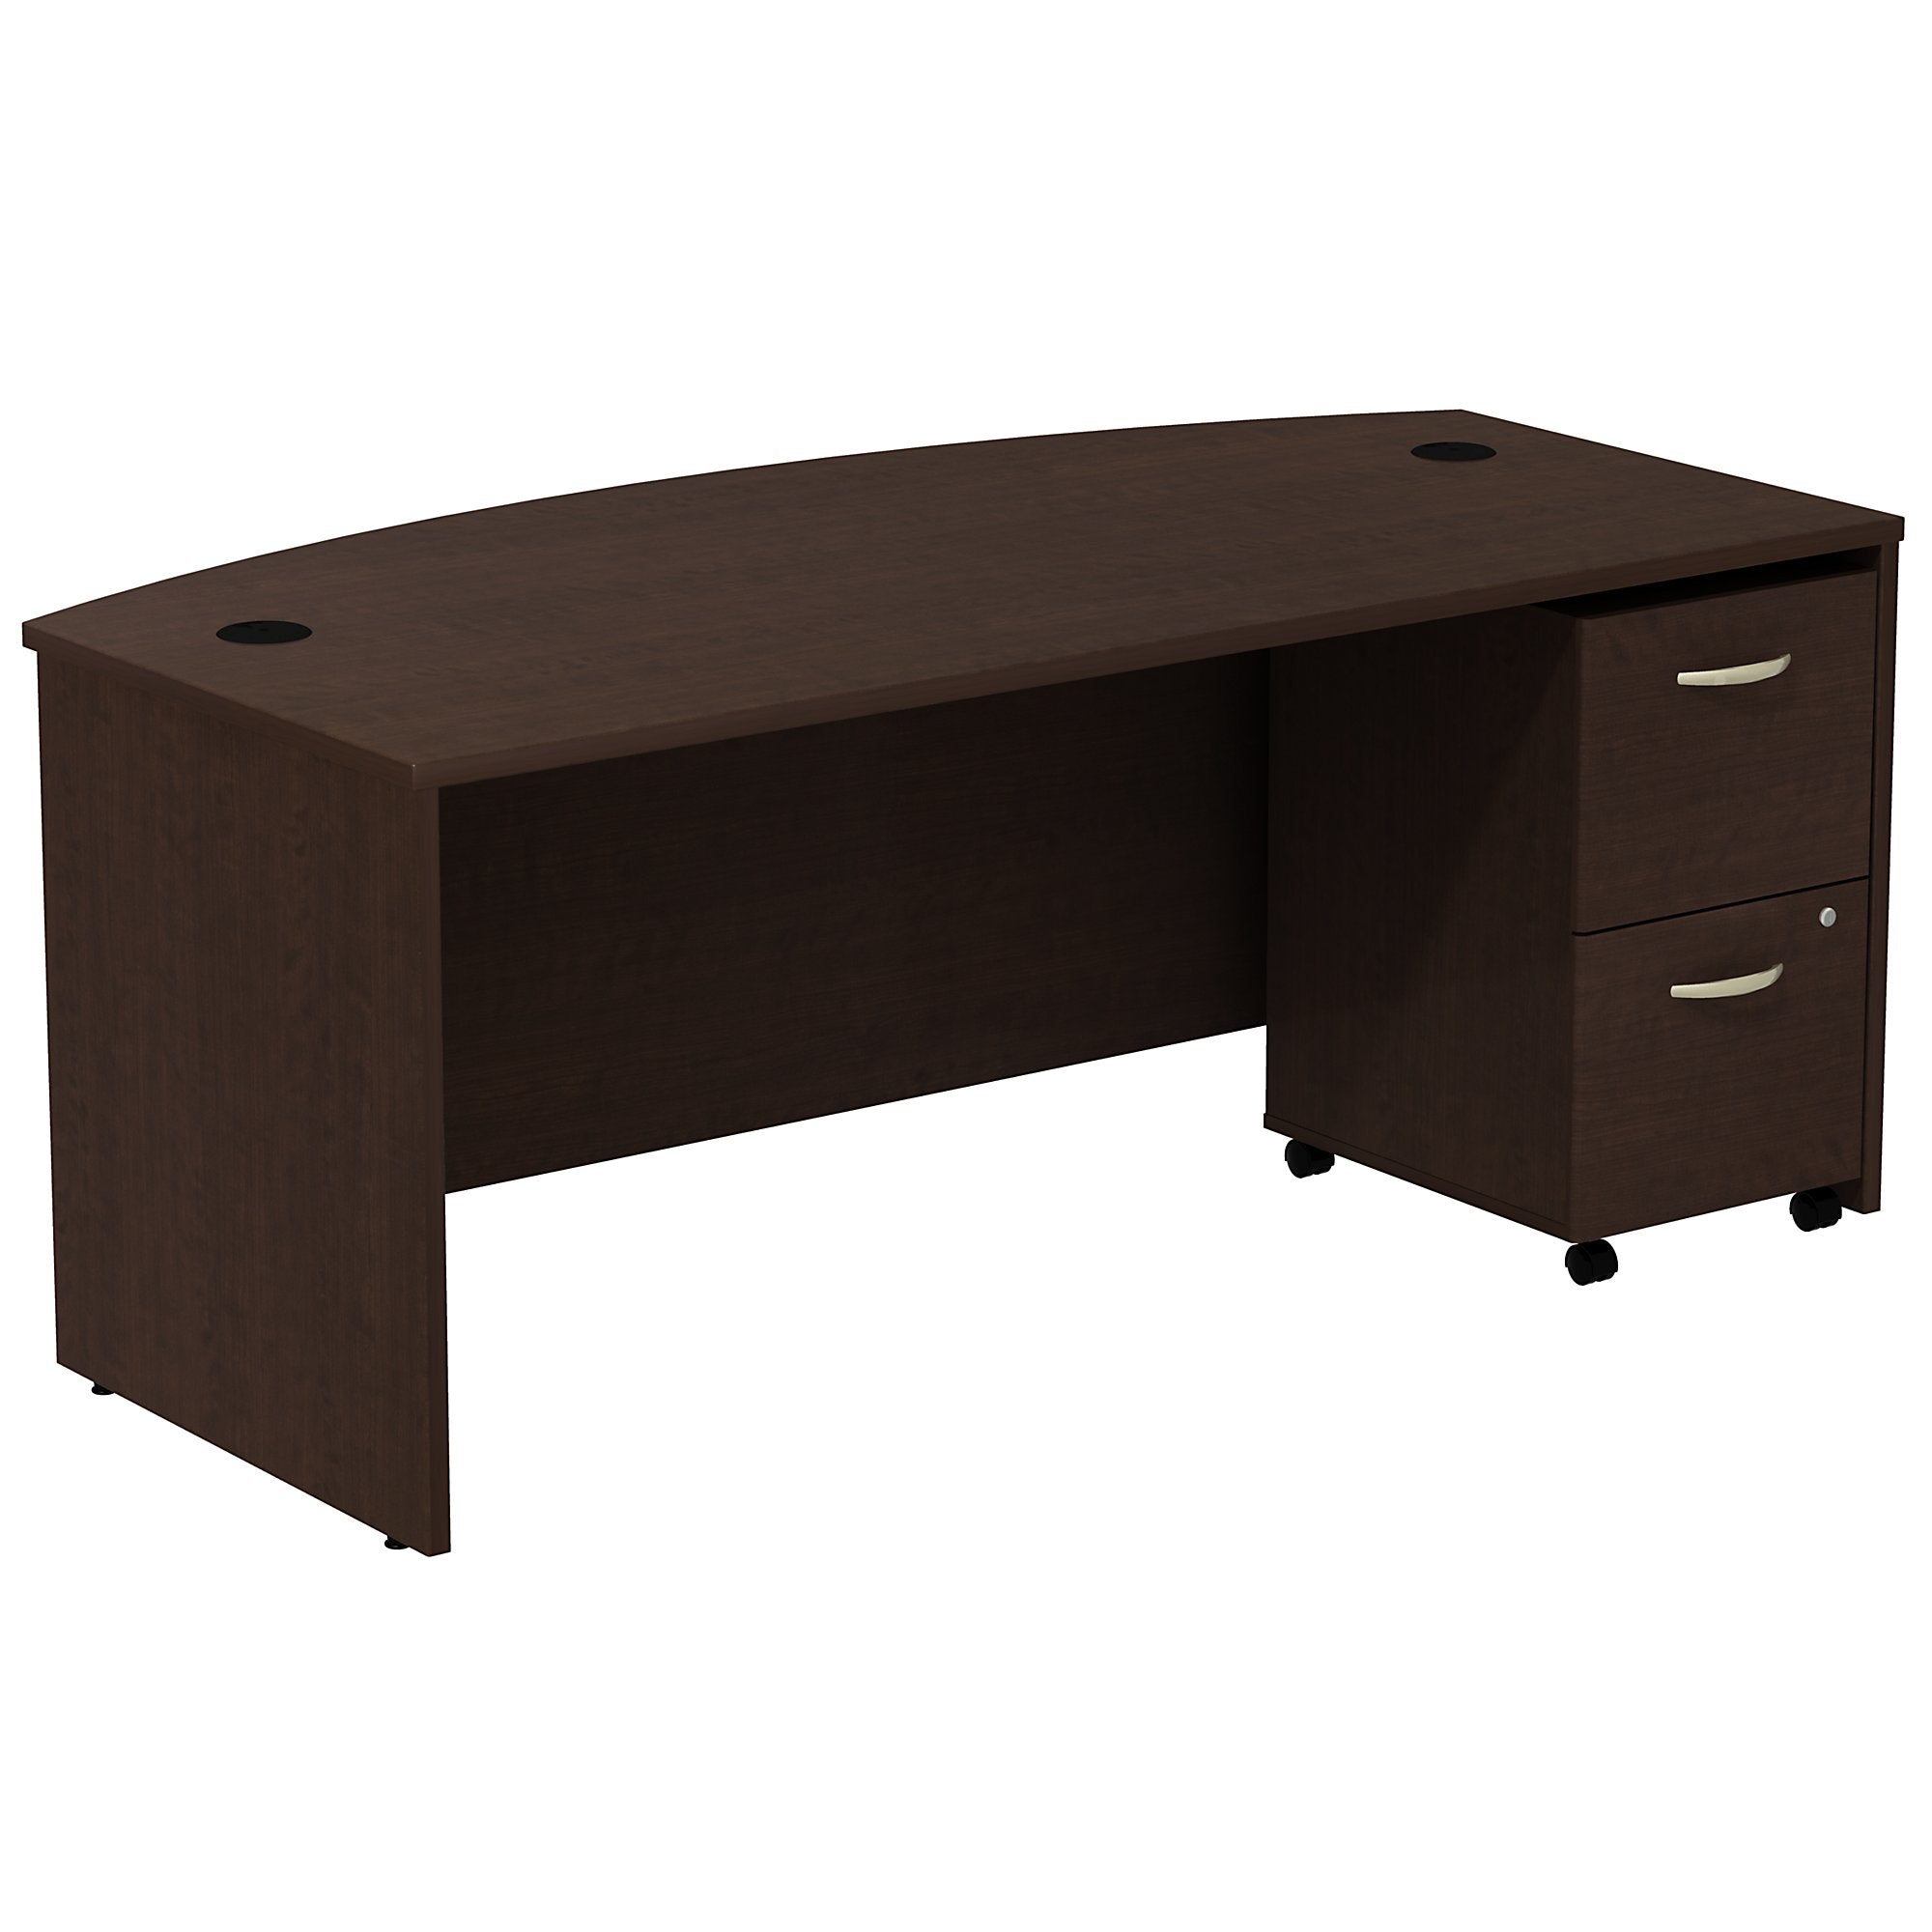 Bush Business Furniture Series C Bow Front Desk with 2 Drawer Mobile Pedestal | Mocha Cherry